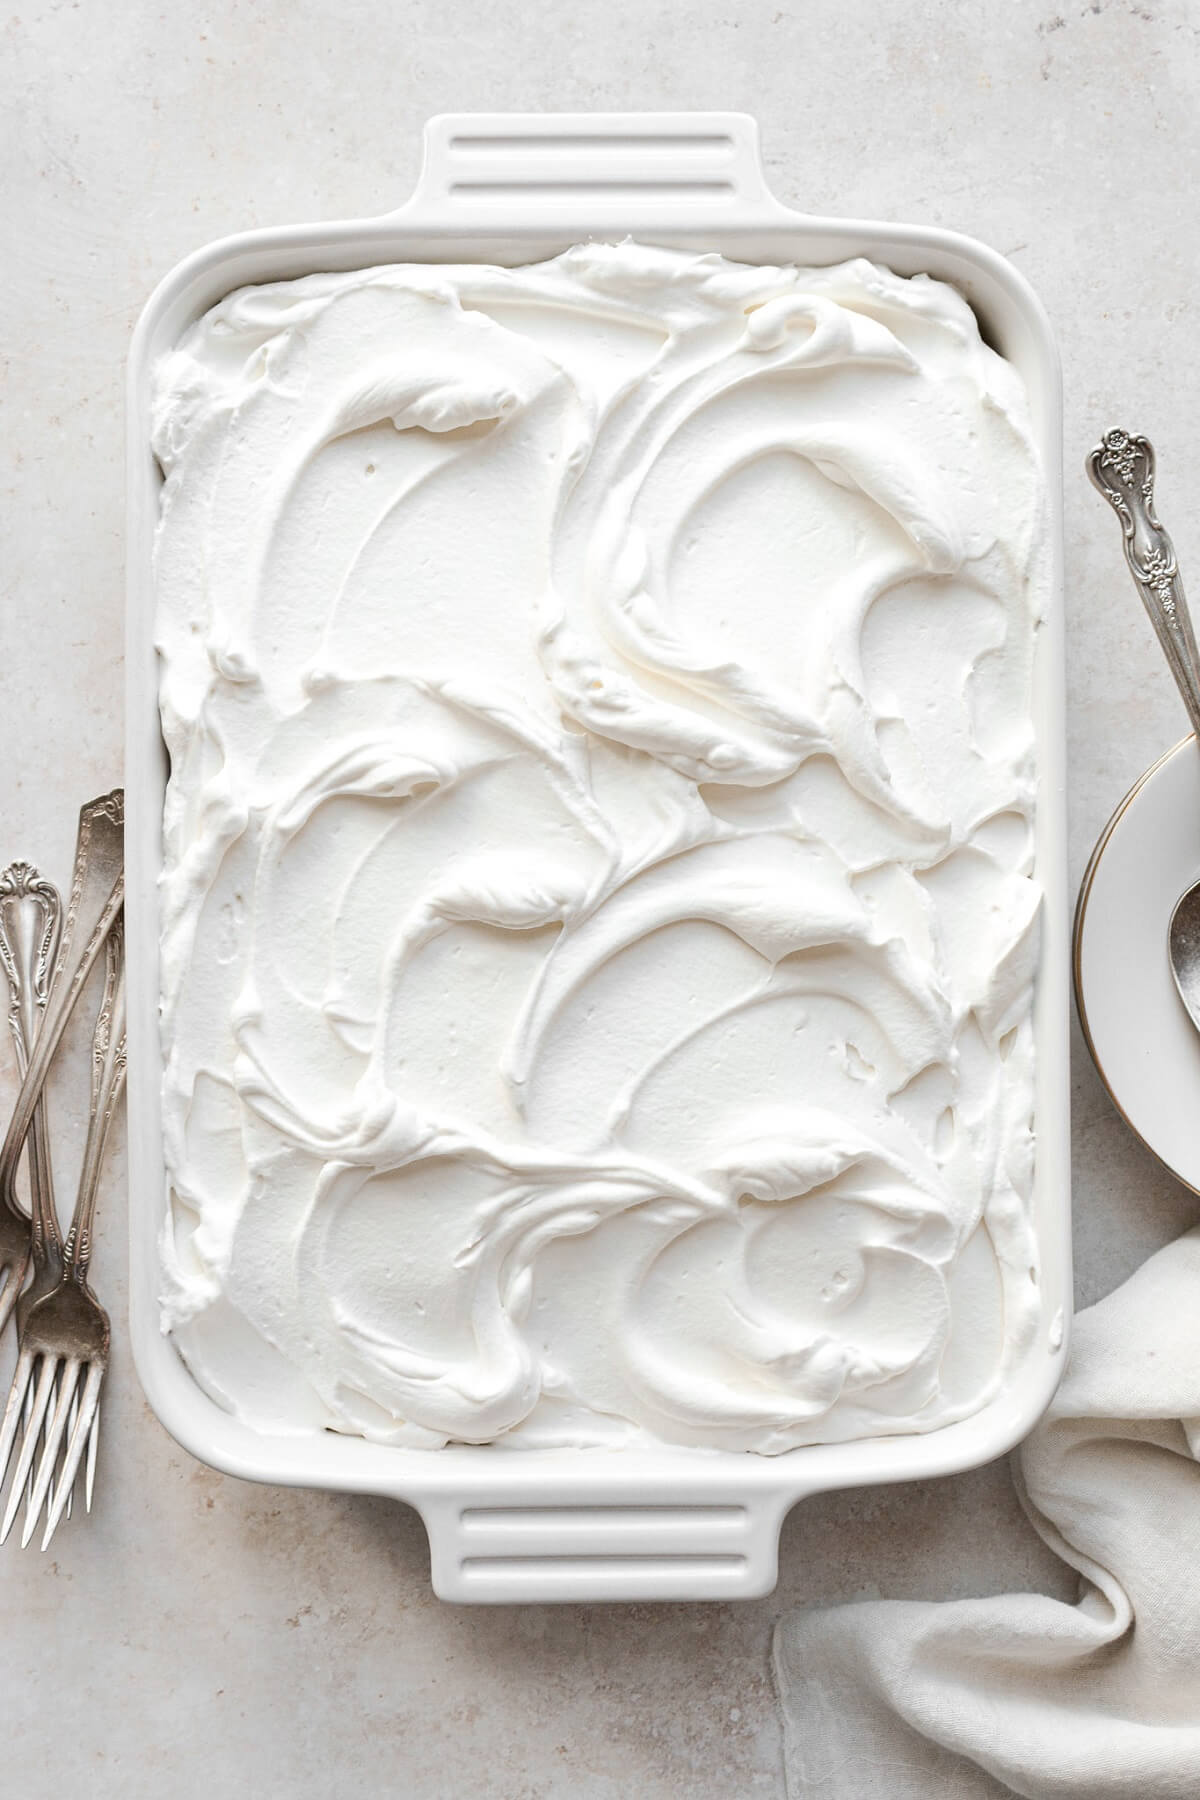 Tres leches cake with whipped cream frosting.